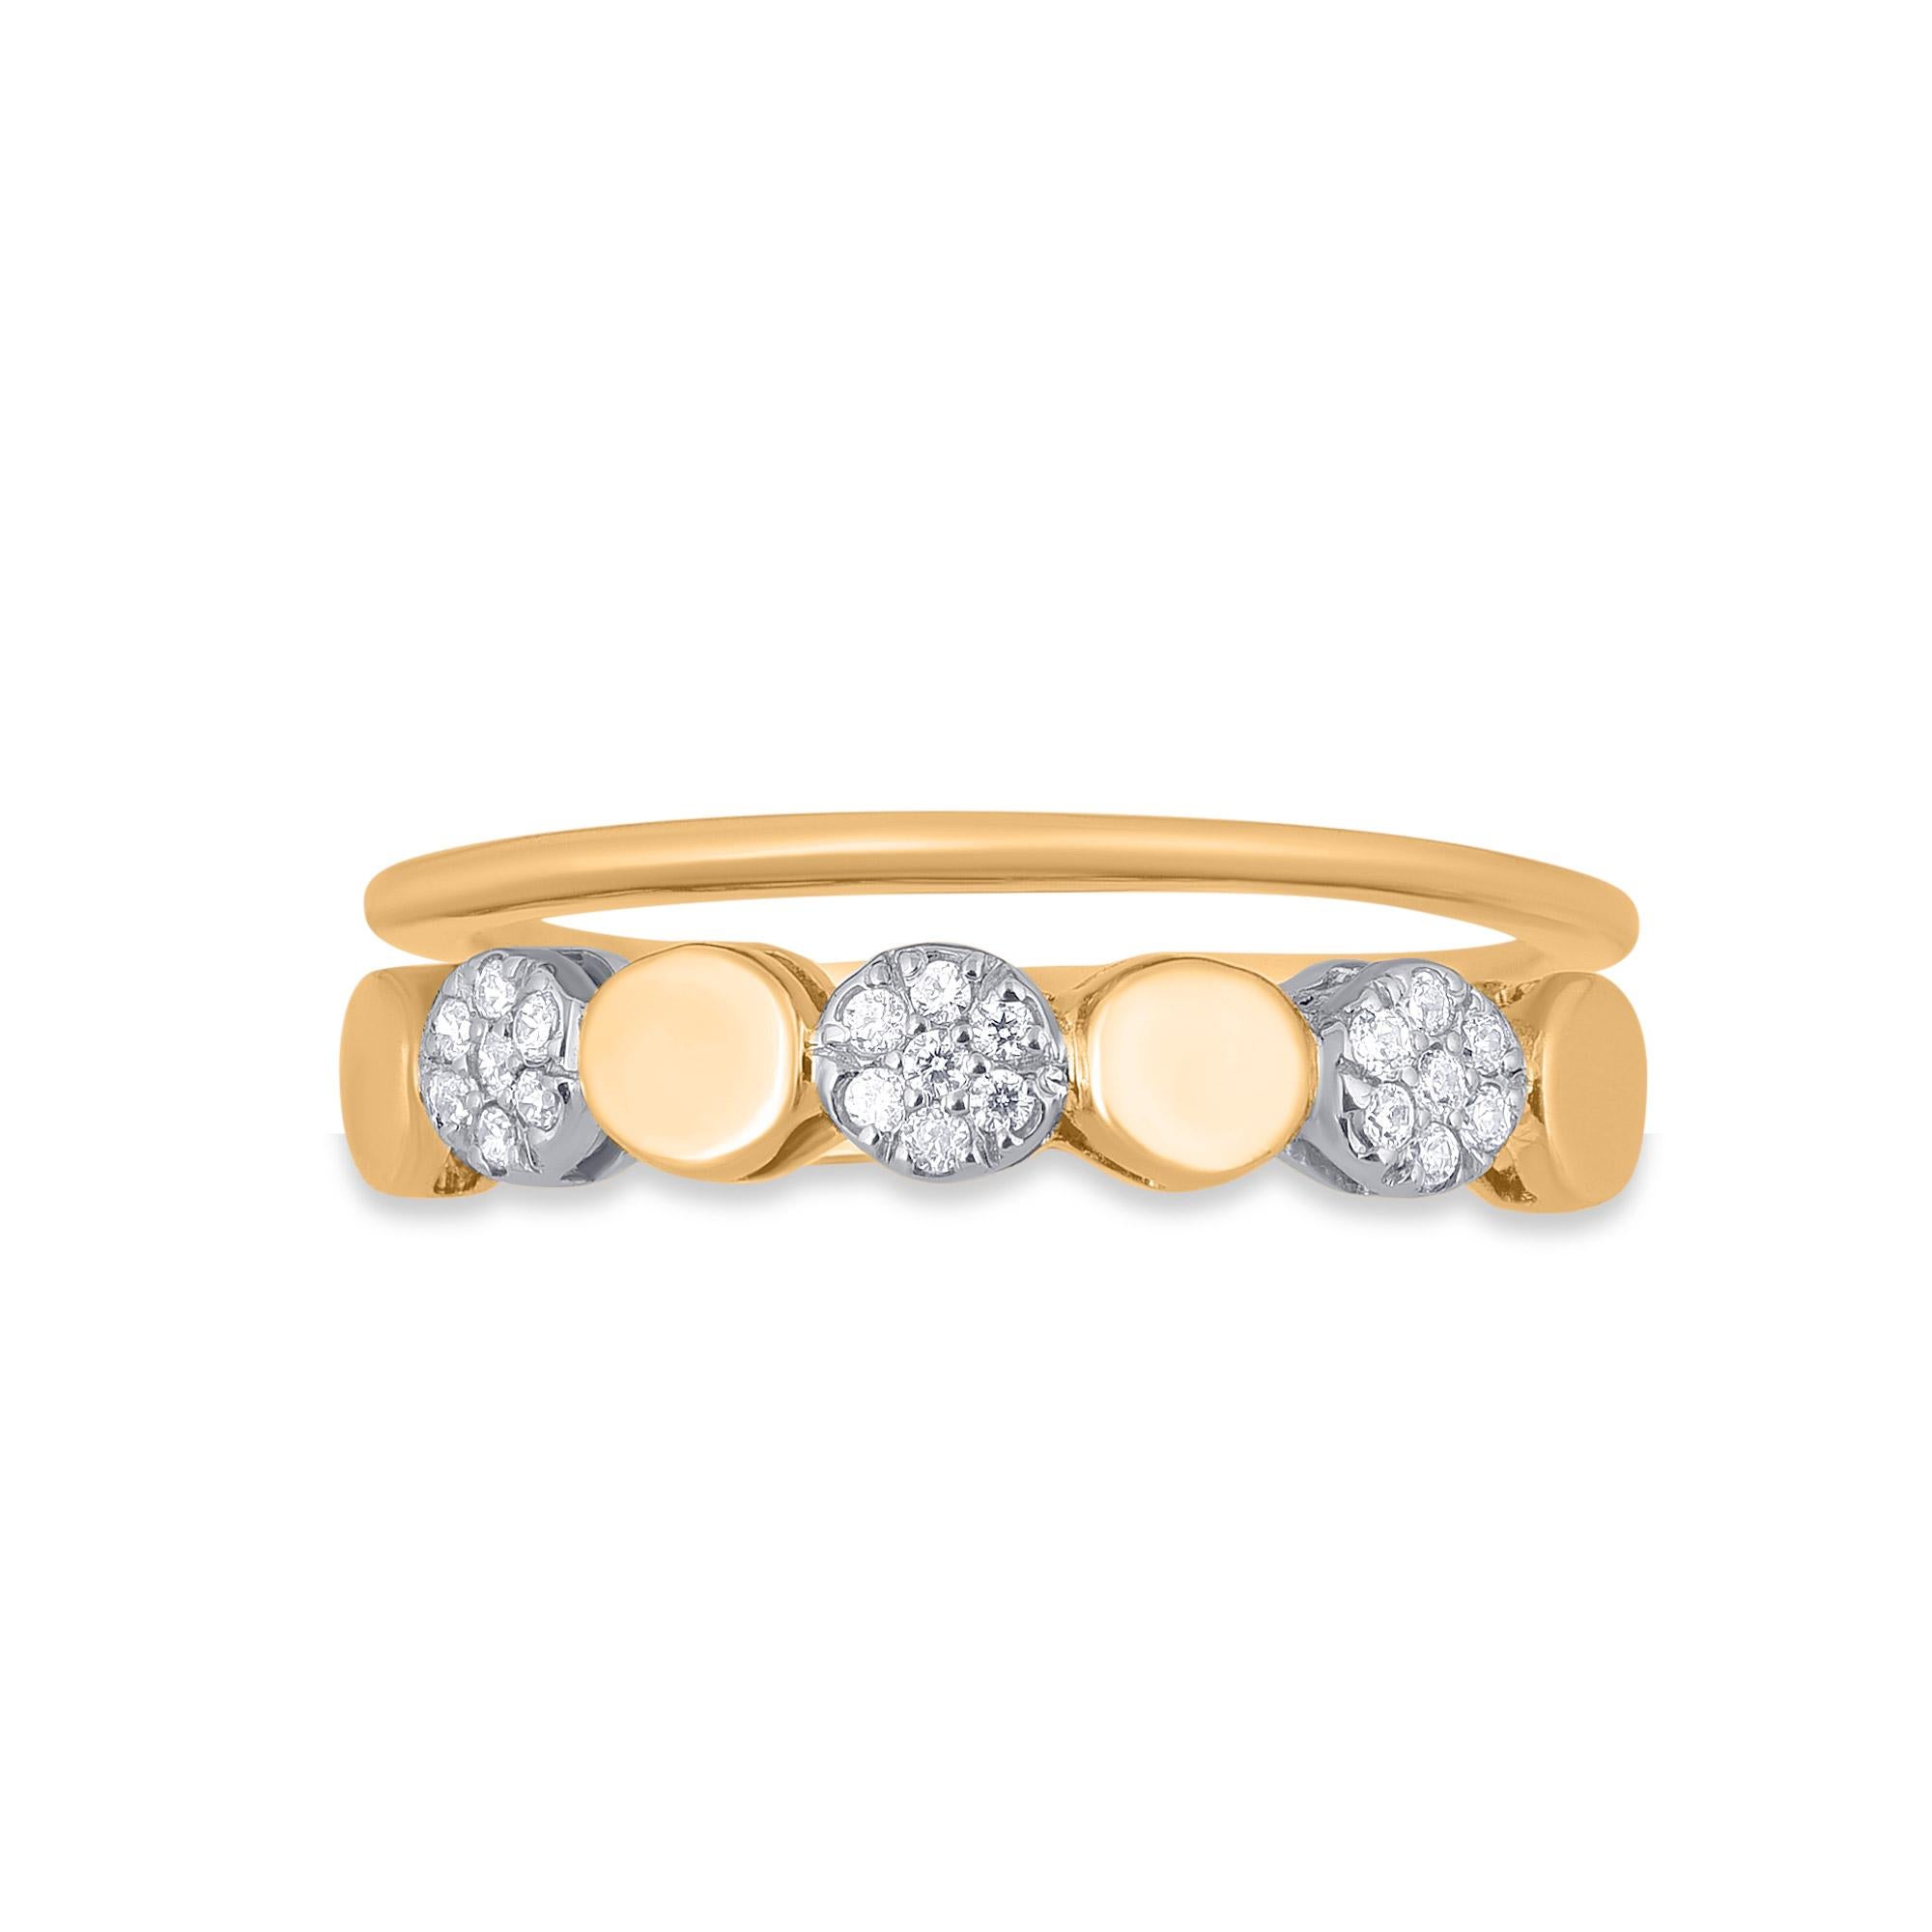 Honor your special day with this exceptional diamond band ring. Crafted in 14 Karat yellow gold. This band ring features a sparkling 21 brilliant cut round diamonds beautifully set in prong setting. The total diamond weight is 0.15 Carat. The